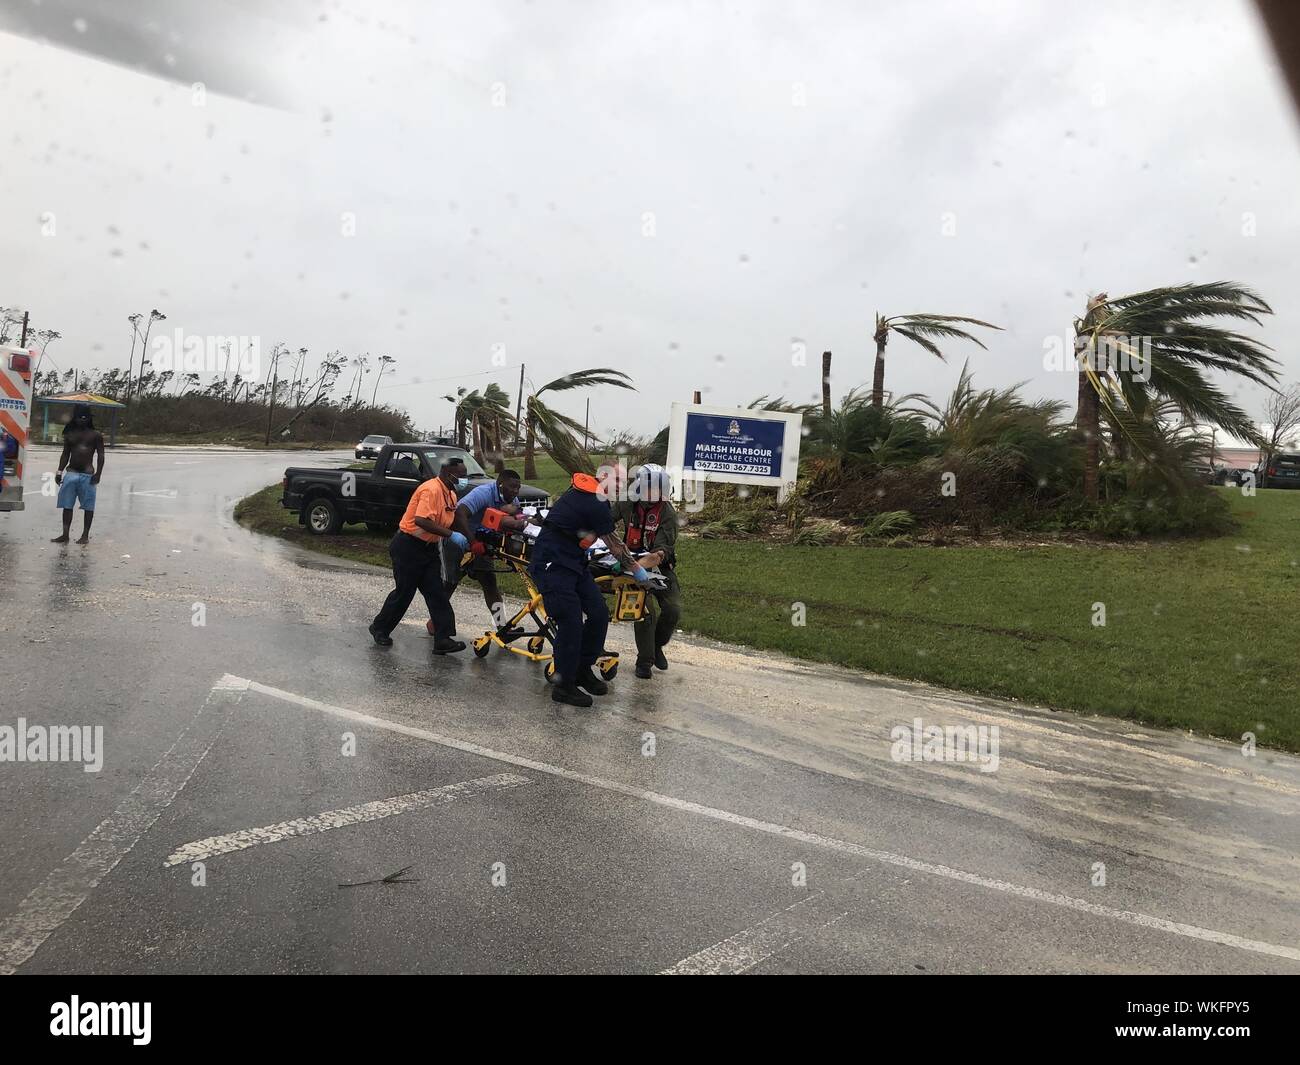 Coast Guard personnel help medevac a patient in the Bahamas during Hurricane Dorian, September 3, 2019. The Coast Guard is supporting the Bahamian National Emergency Management Agency and the Royal Bahamian Defense Force with hurricane response efforts. (Coast Guard Photo). () Stock Photo